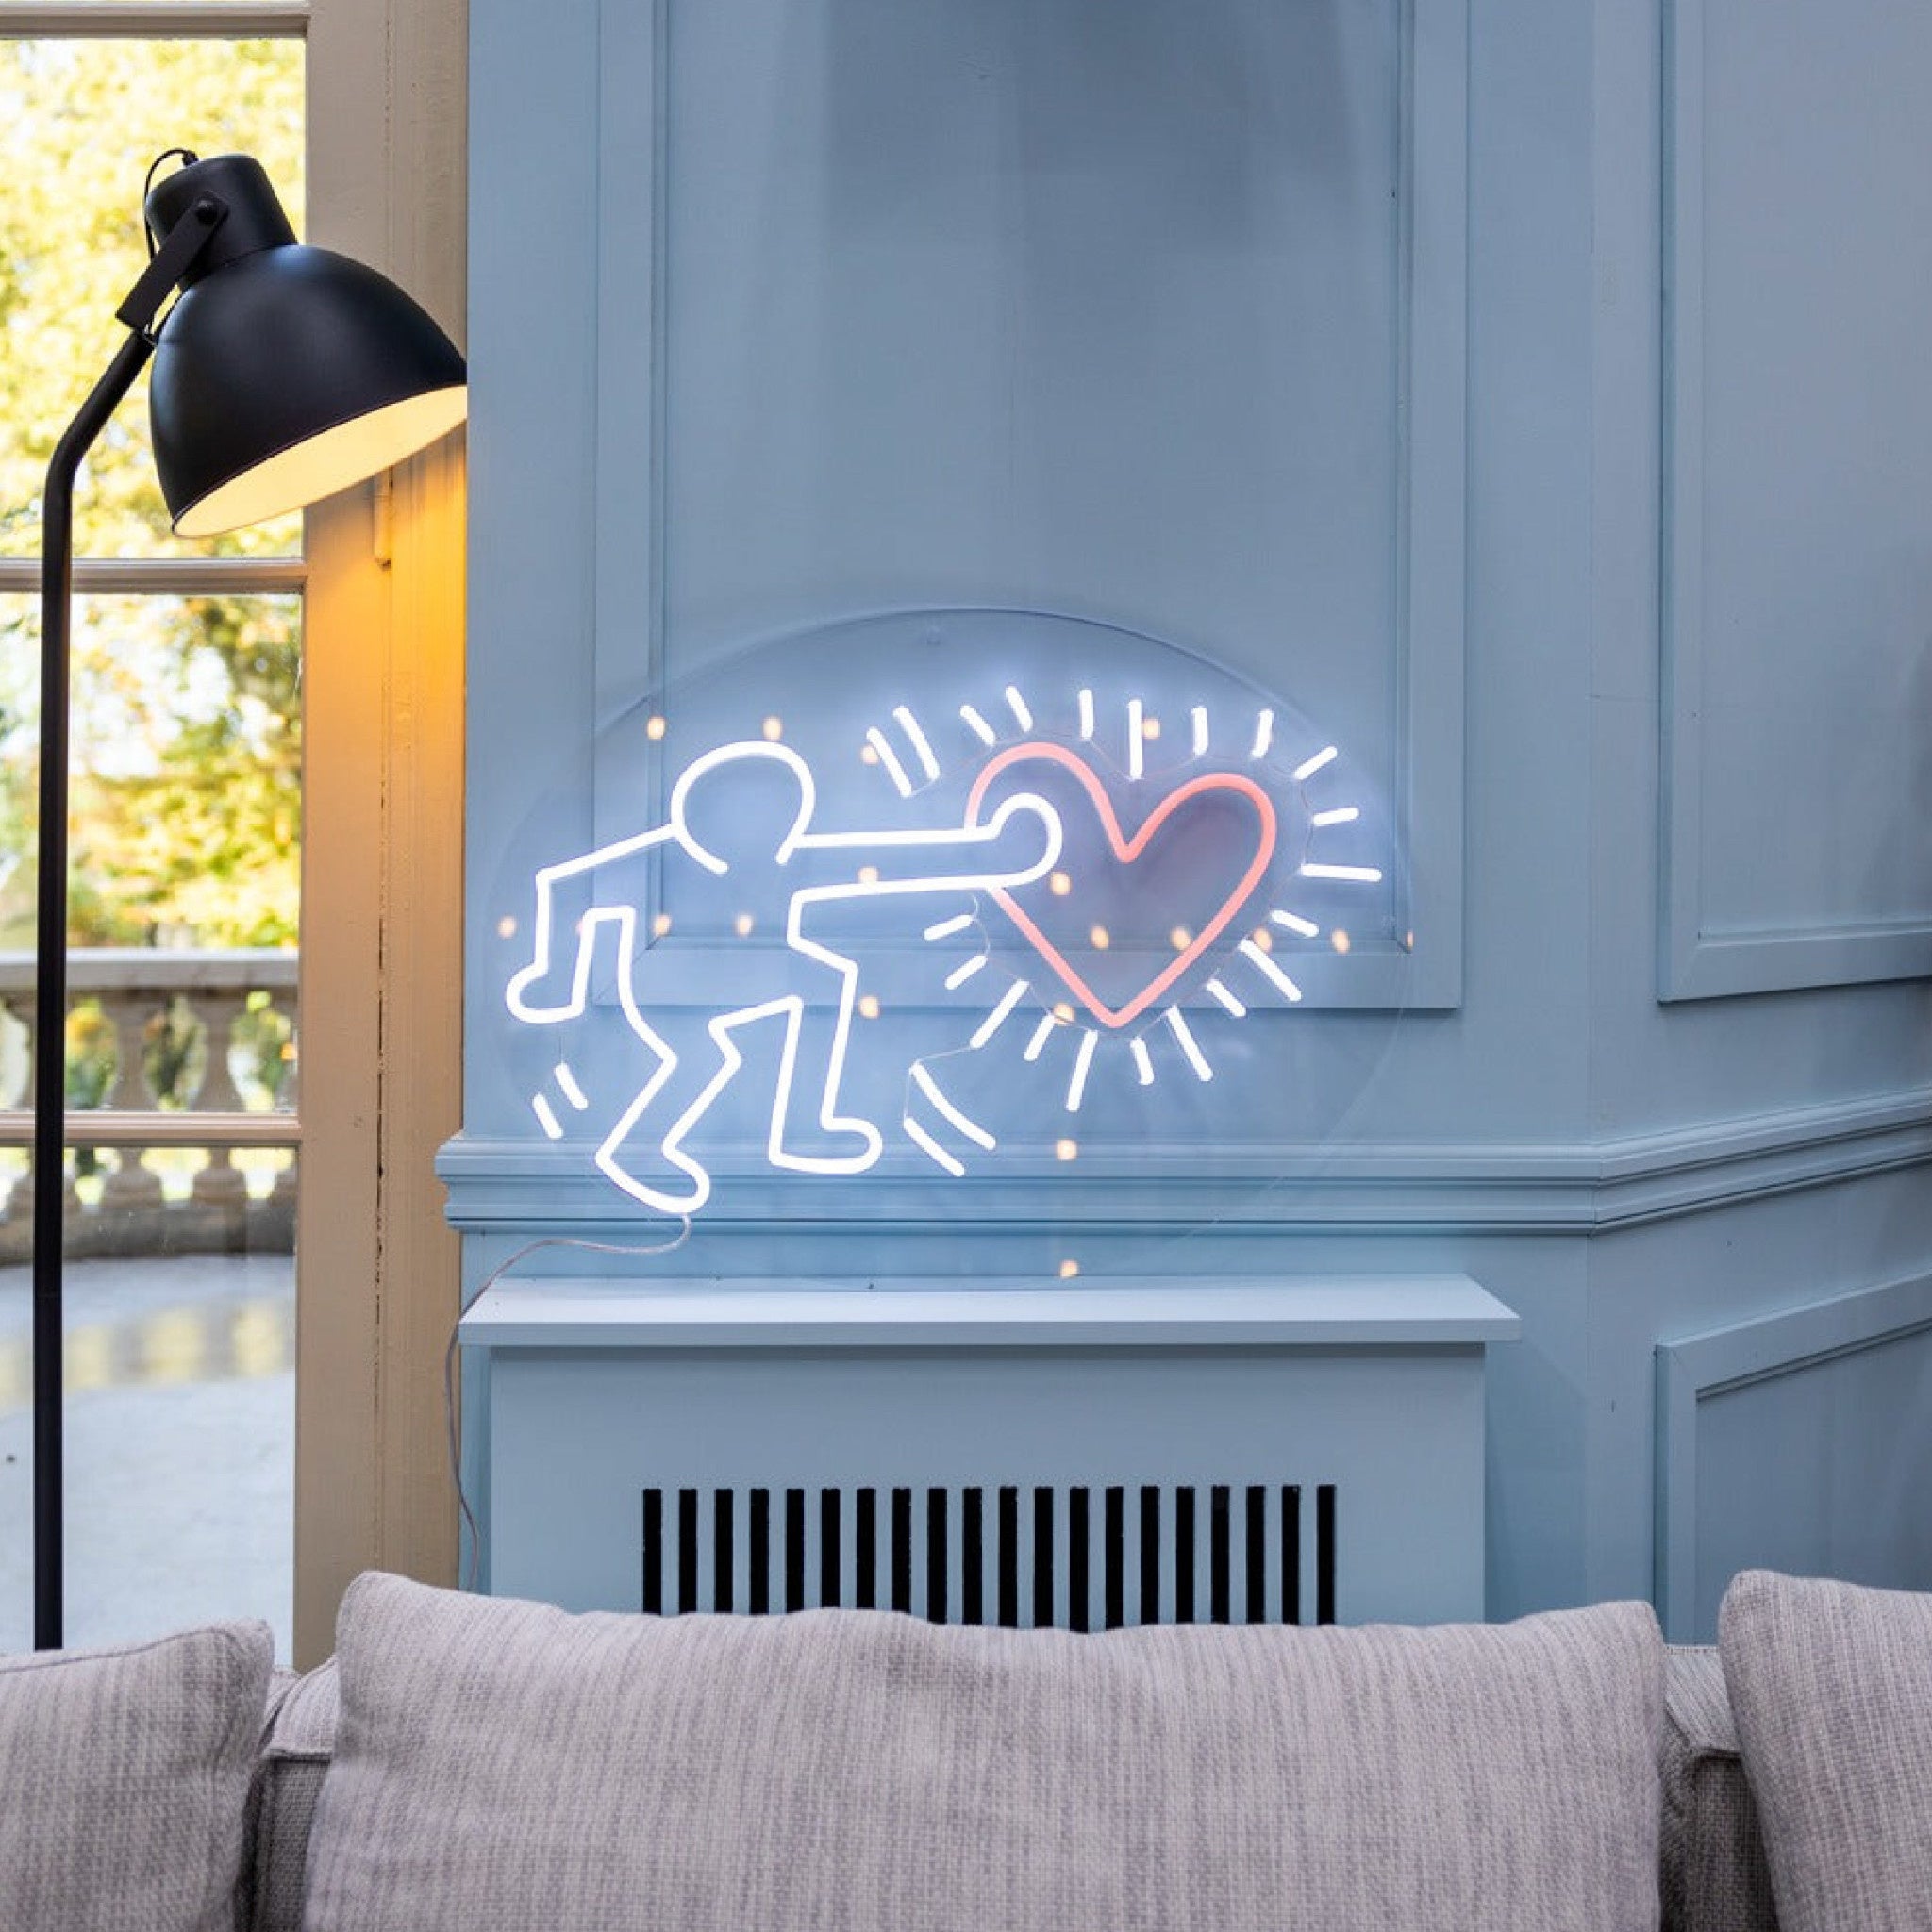 Send Love by Keith Haring - LED Neon Sign